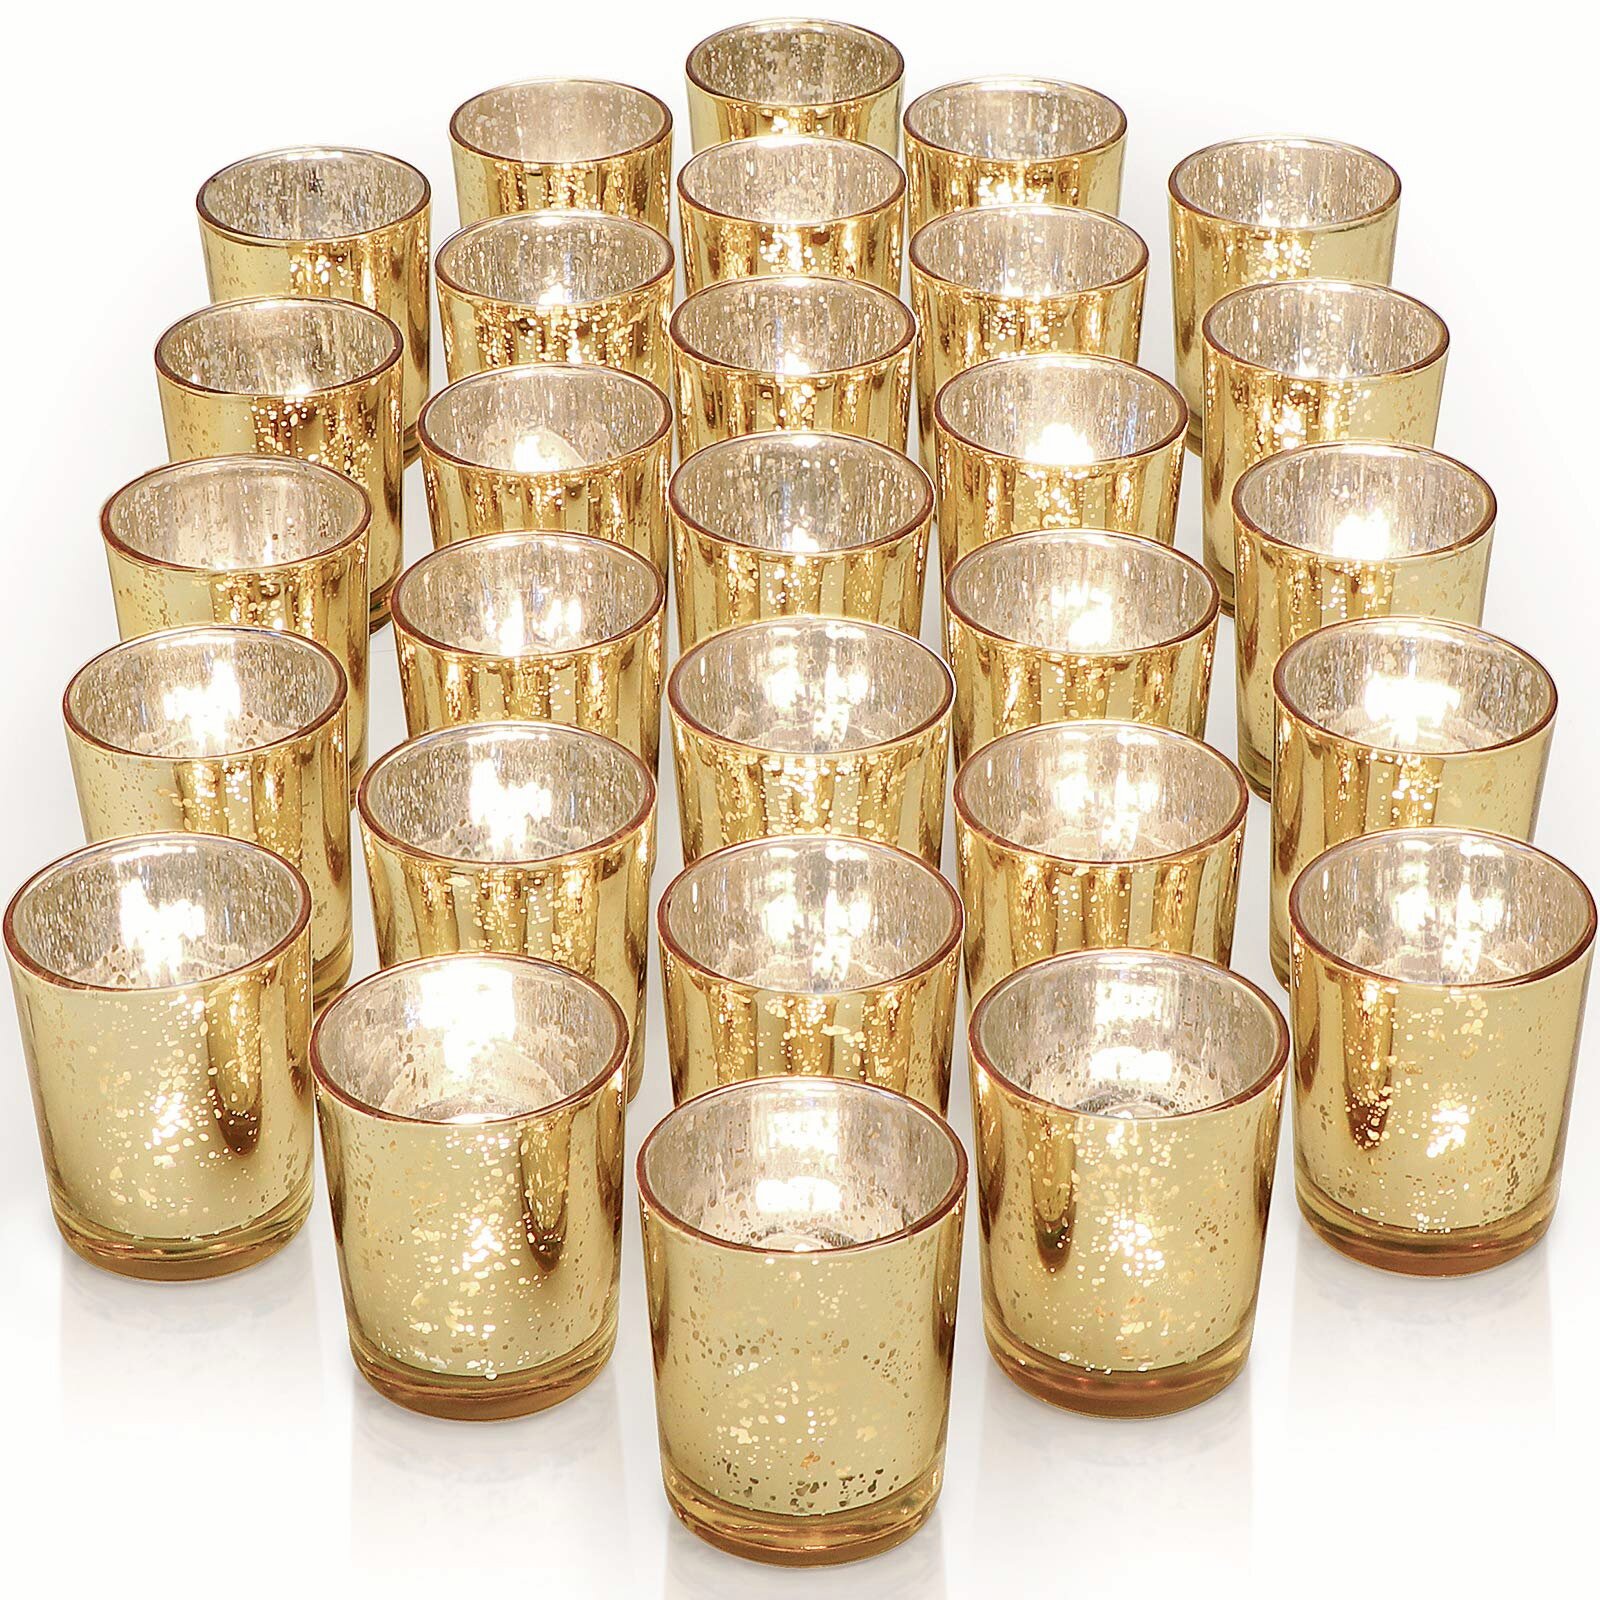 Votive Candle Holder-Set of 12 Wedding Centerpieces for Table Party Mercury Glass Tealight Candle Holders Bulk for Birthday Home Decoration Gold 